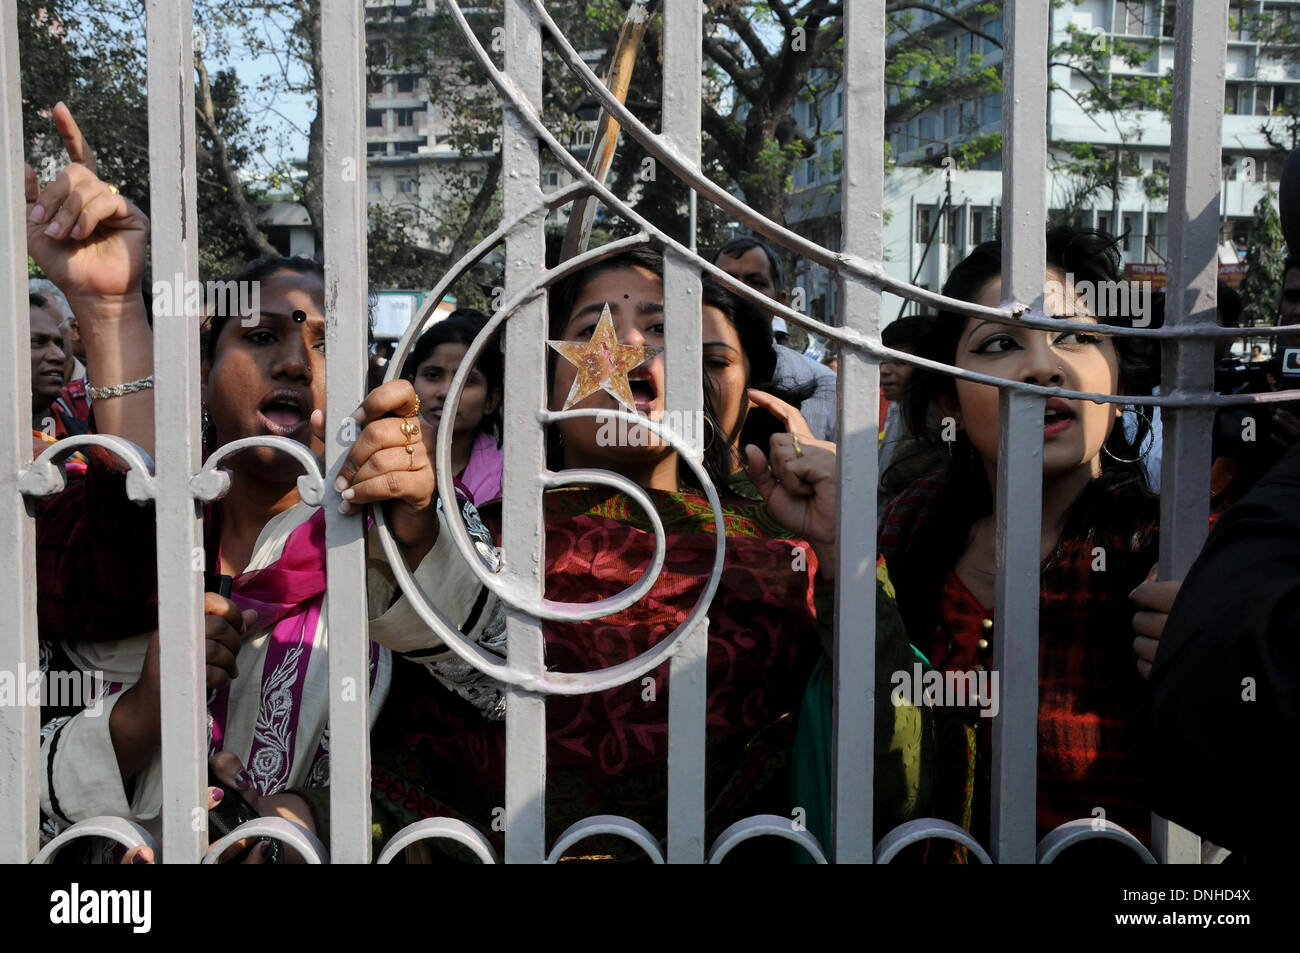 Dhaka, Bangladesh. 30th Dec, 2013. Supporters of Prime Minister Sheikh Hasina's ruling Bangladesh Awami League (AL) party shout slogans in front of the apex court during the 'March for Democracy' rally in Dhaka, Bangladesh, Dec. 30, 2013. Tensions were running high across the Bangladesh's capital Dhaka on Monday as ruling party's women activists clashed with oppostion protesters. Credit:  Shariful Islam/Xinhua/Alamy Live News Stock Photo